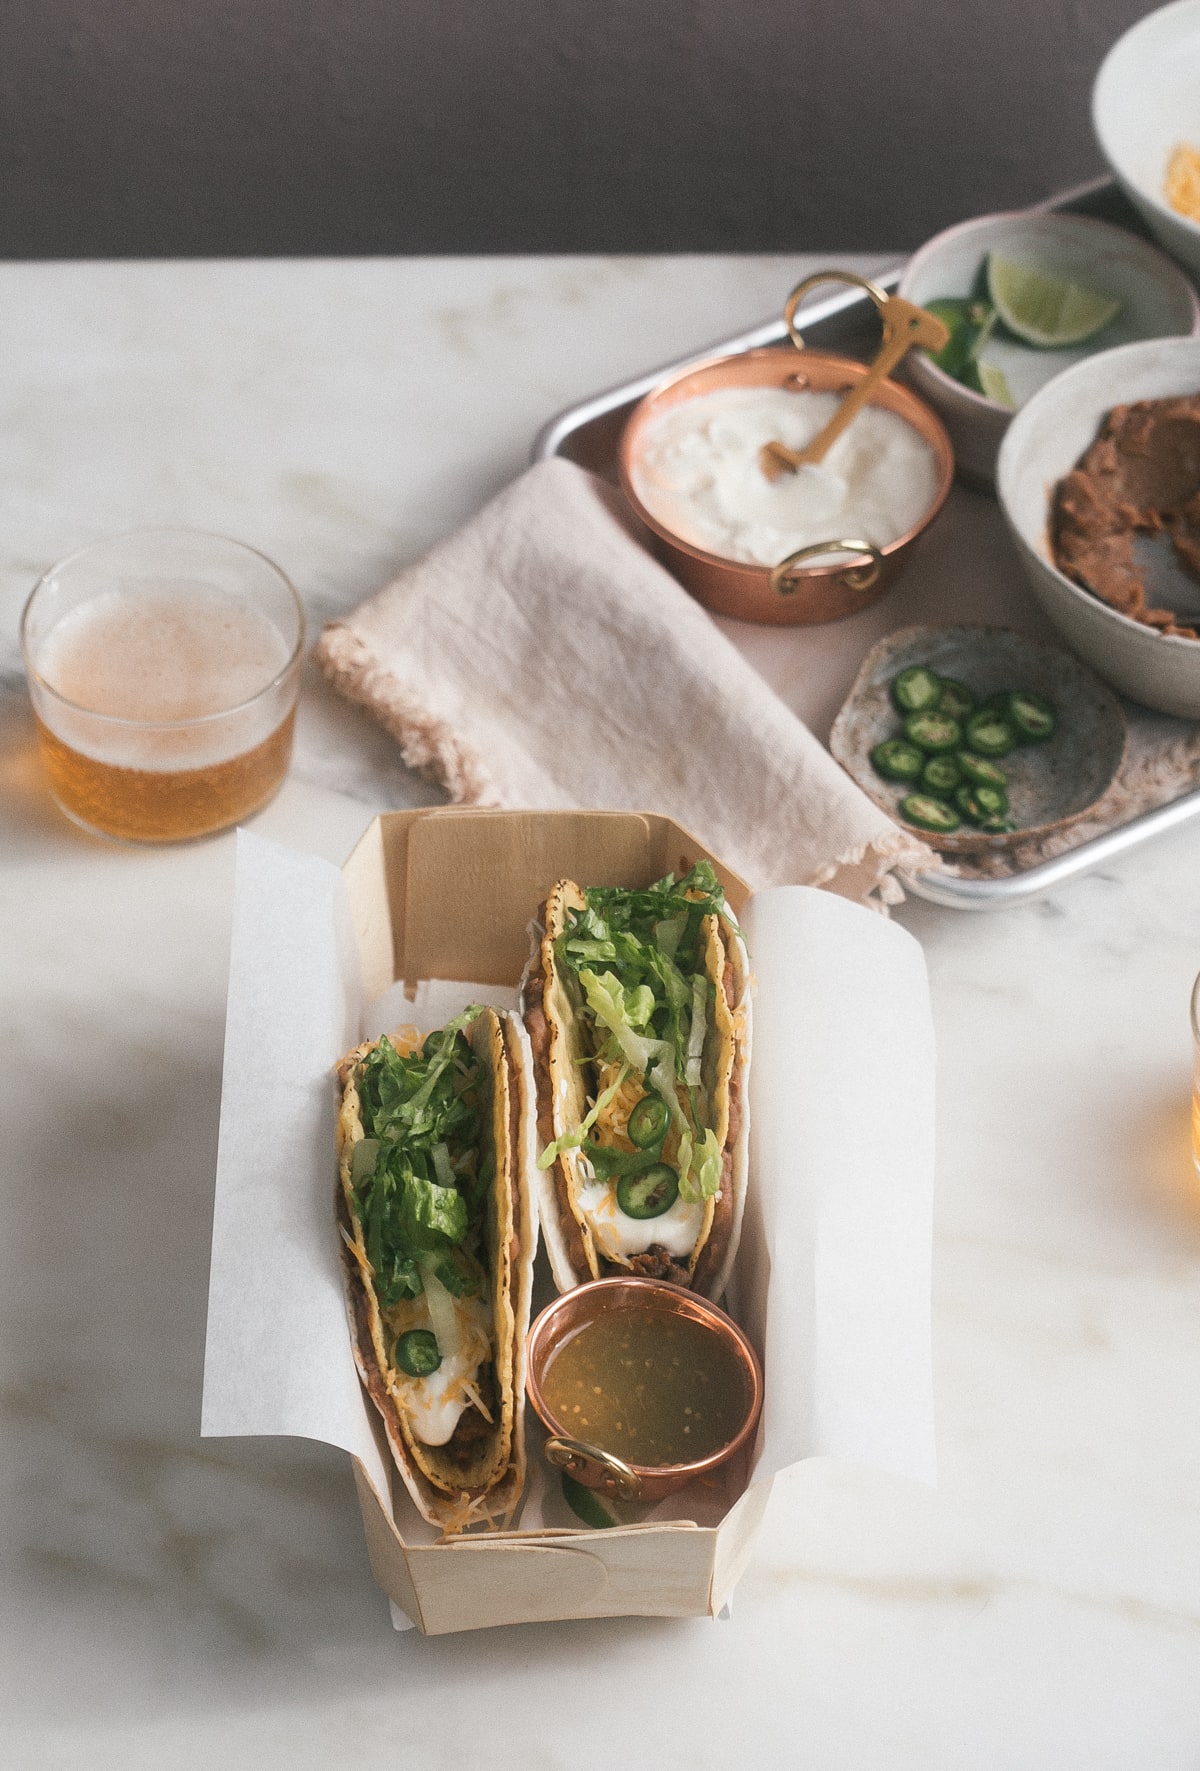 3/4 image of tacos in a box with a glass of beer and taco toppings near by.